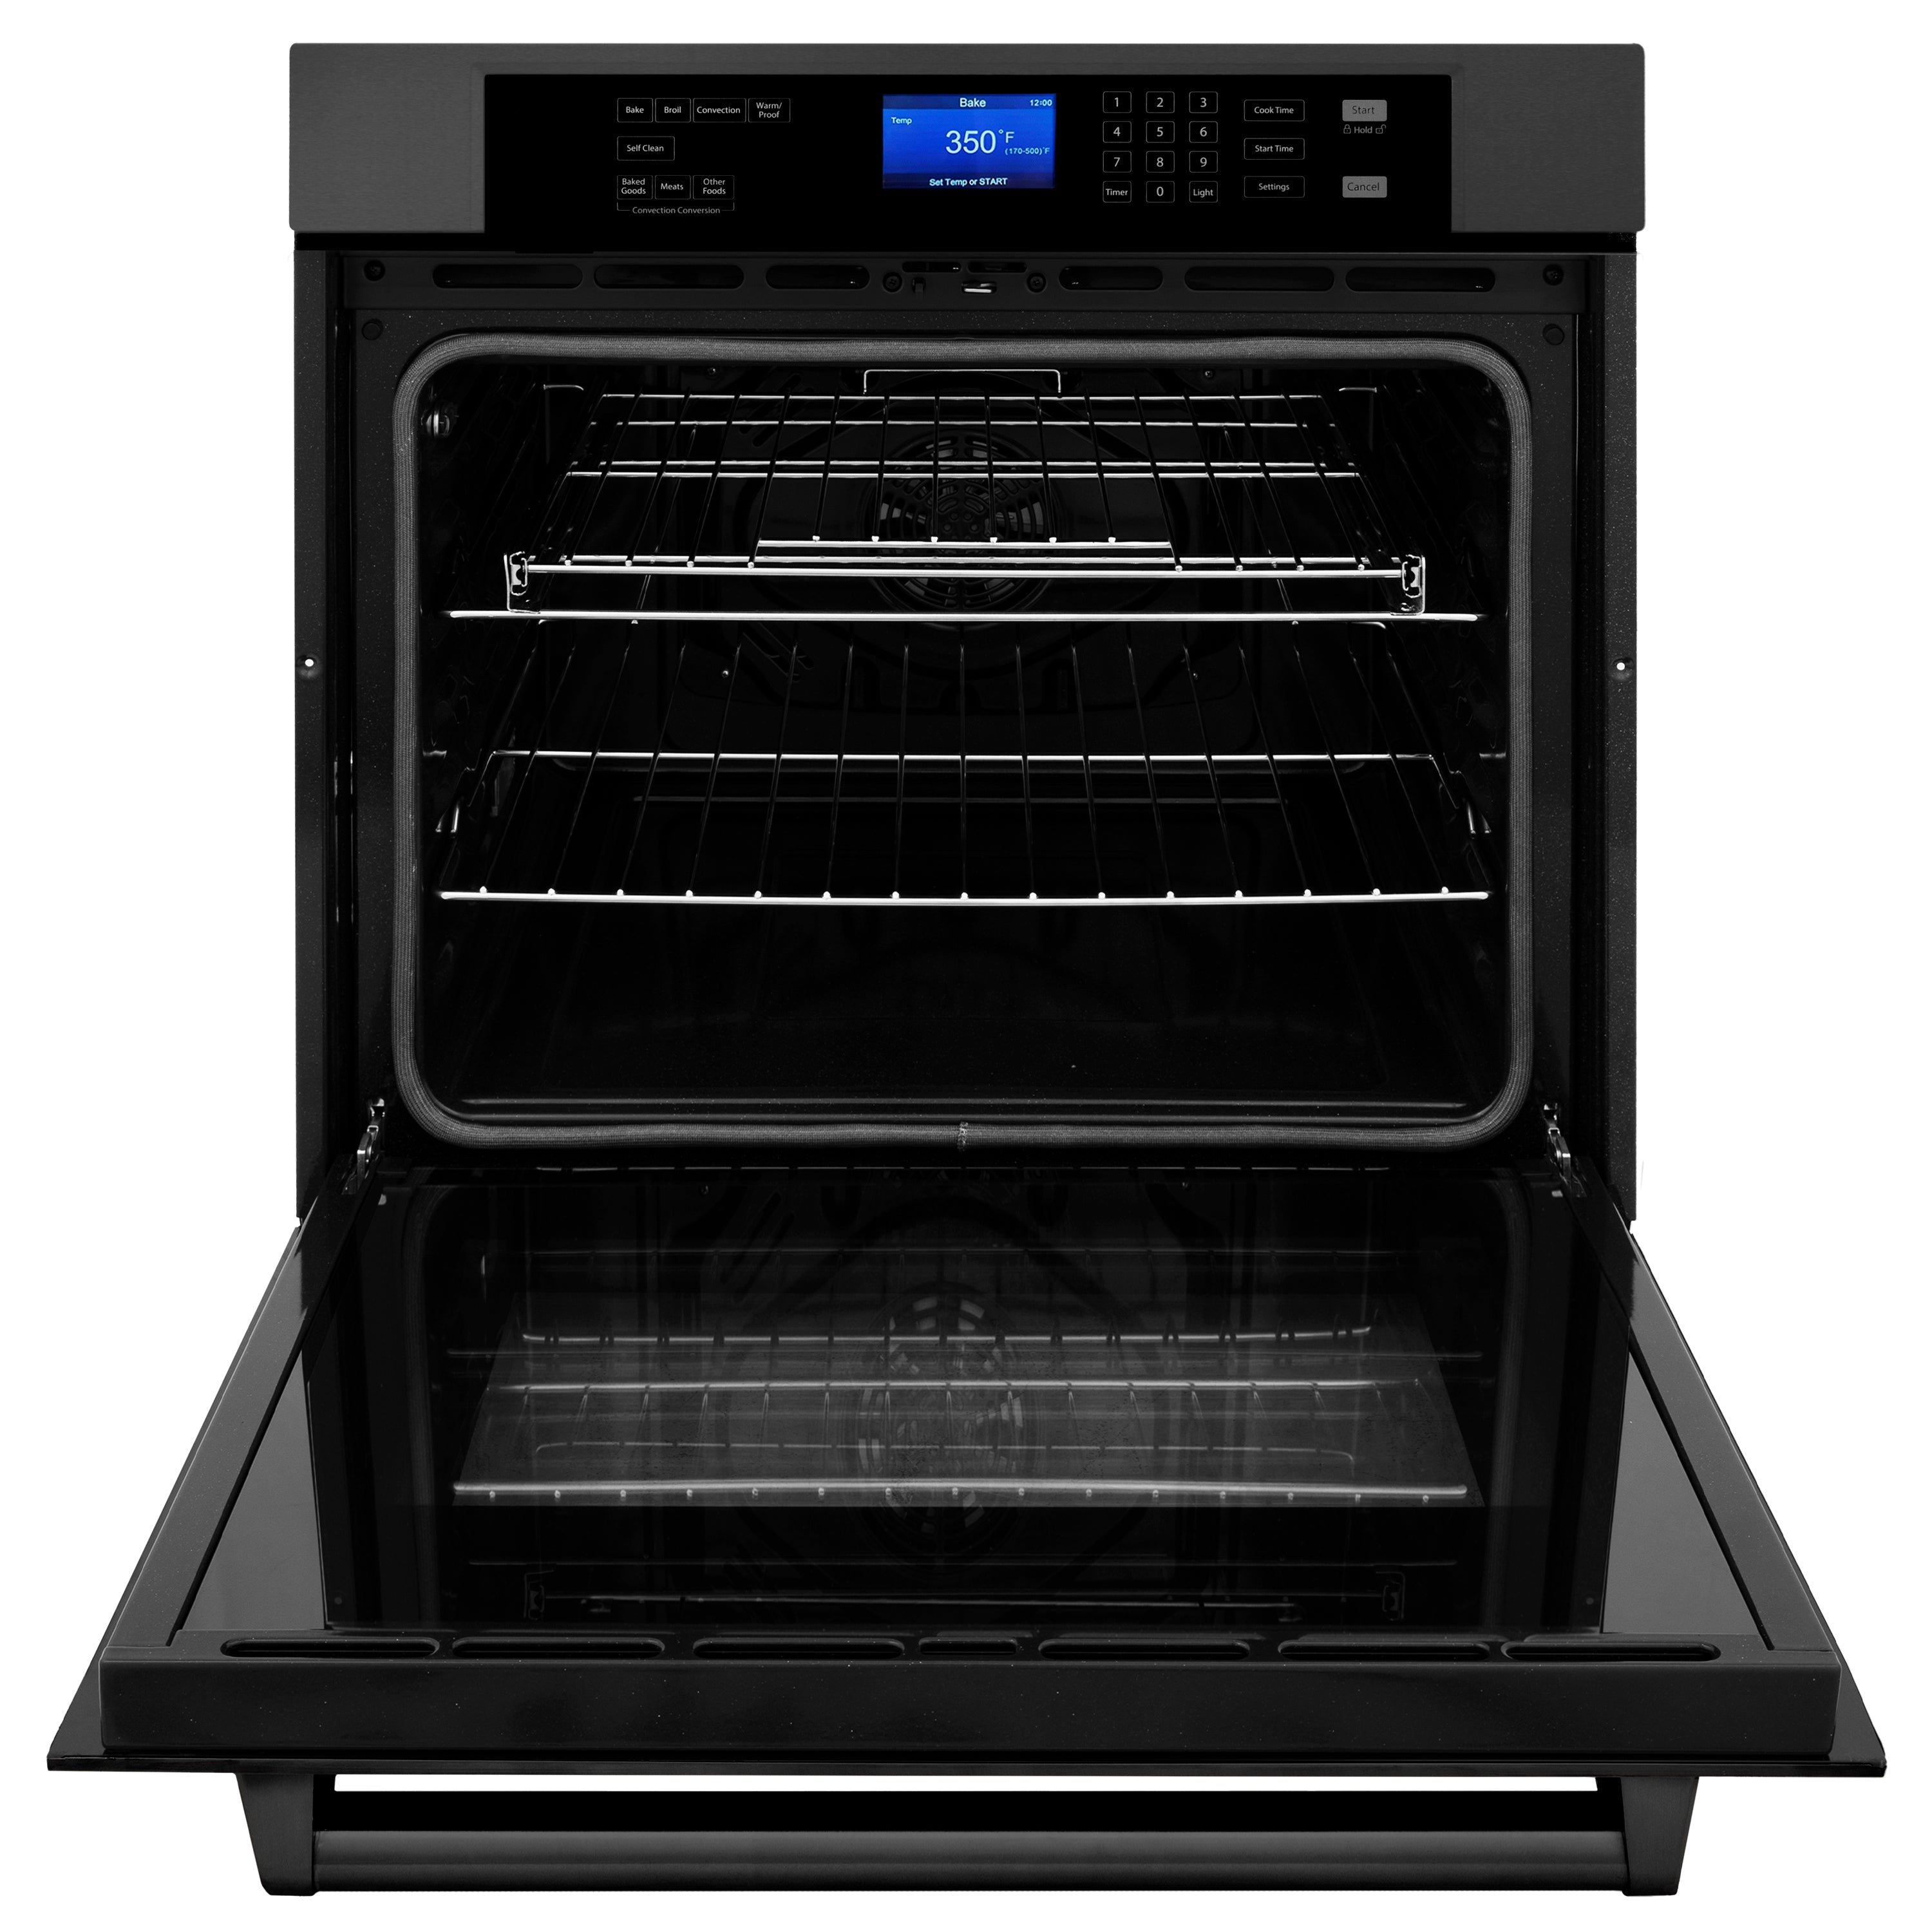 ZLINE 30" Professional Single Wall Oven with Self Clean and True Convection in Stainless Steel (AWS-30) - New Star Living